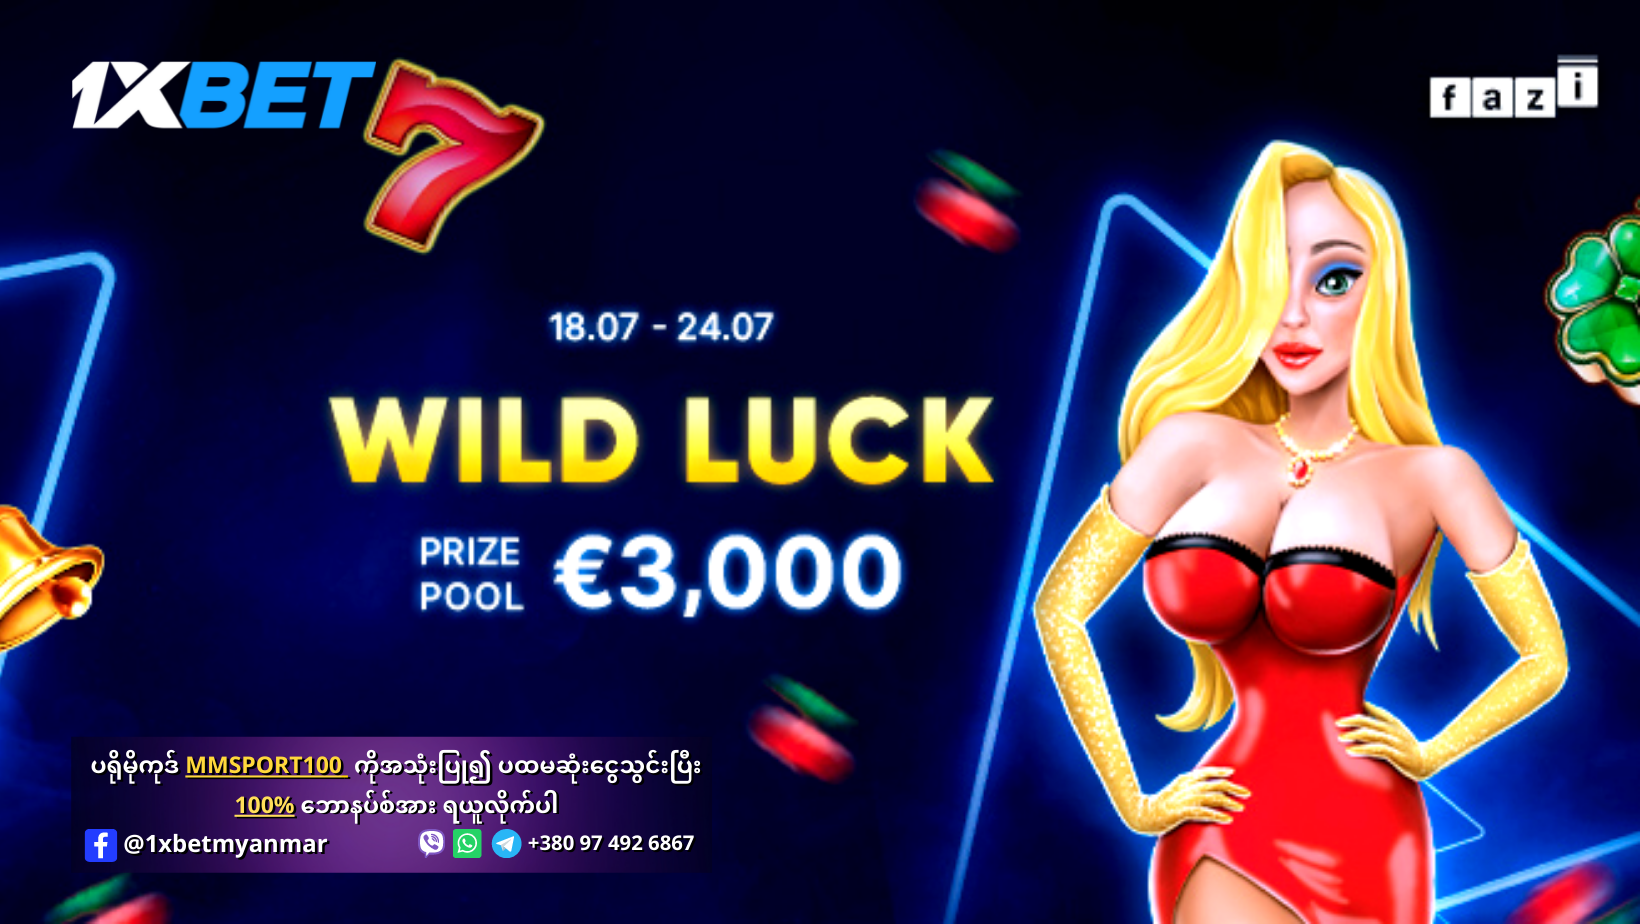 Wild Luck Promotion